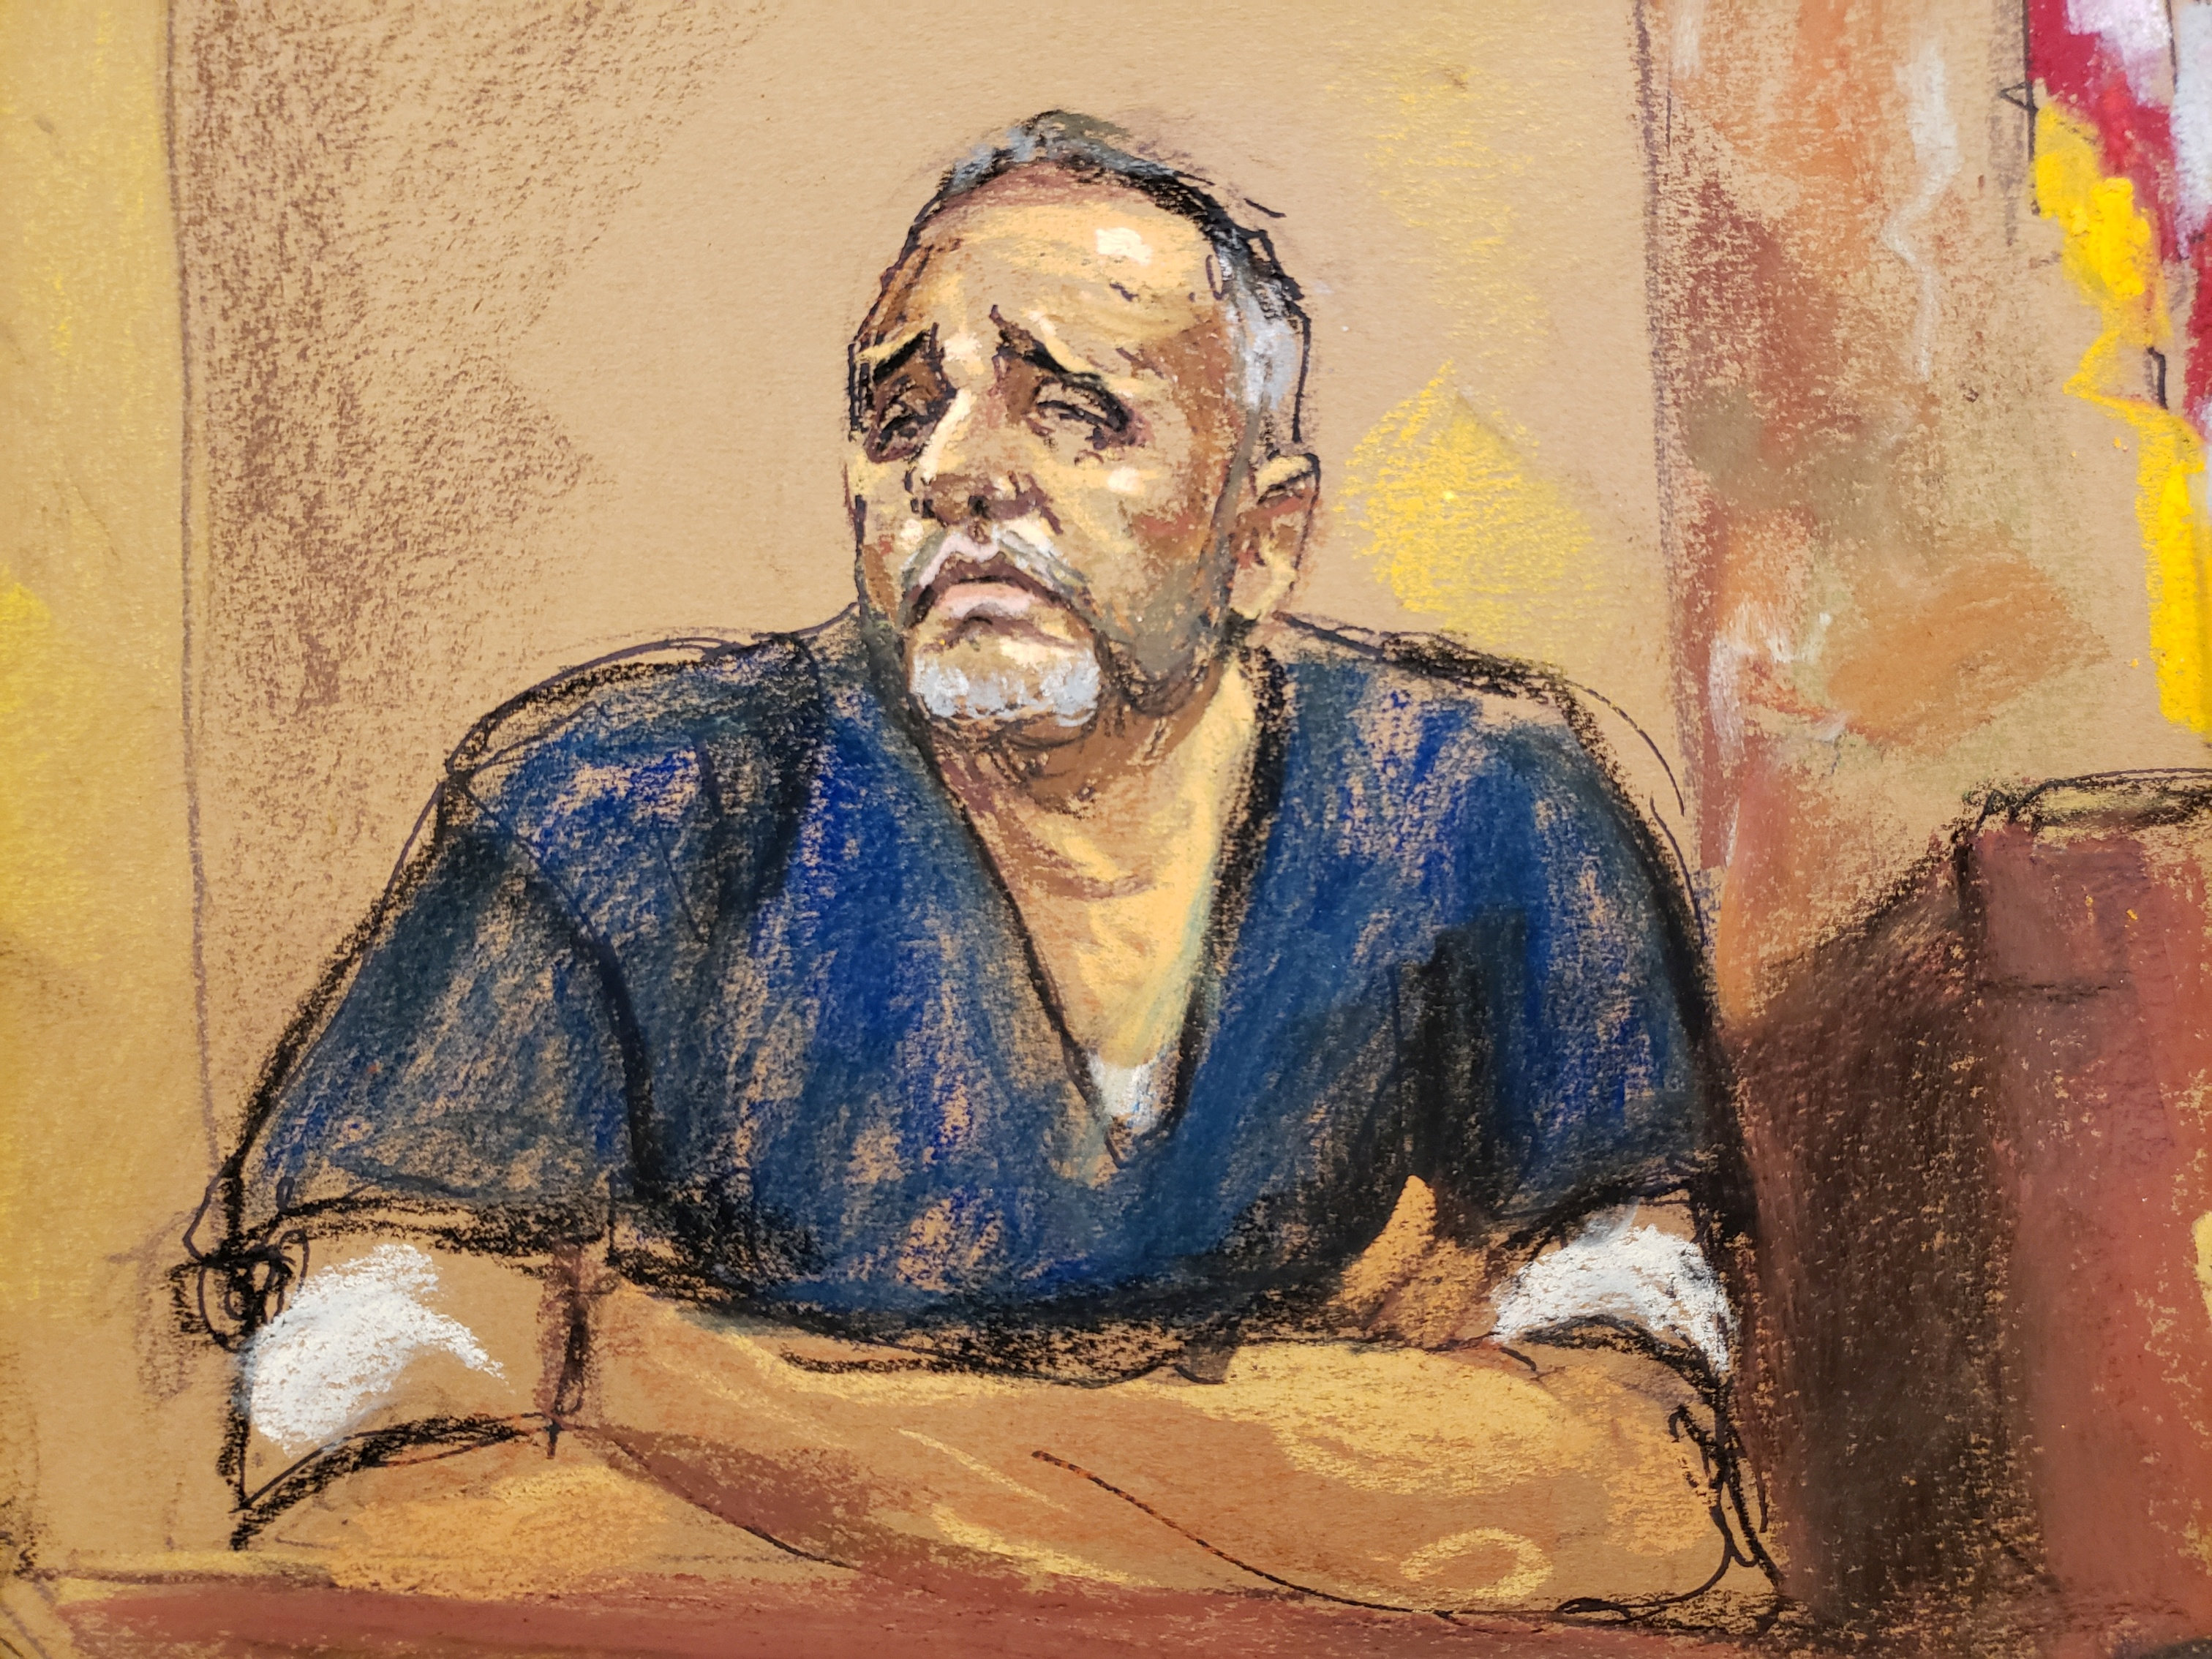 Alex Cifuentes, a close associate of the accused Mexican drug lord Joaquin "El Chapo" Guzman (not shown) is seen testifying in this courtroom sketch in Brooklyn federal court in New York, US, January 15, 2019. REUTERS/Jane Rosenberg NO RESALES.  DO NOT ARCHIVE